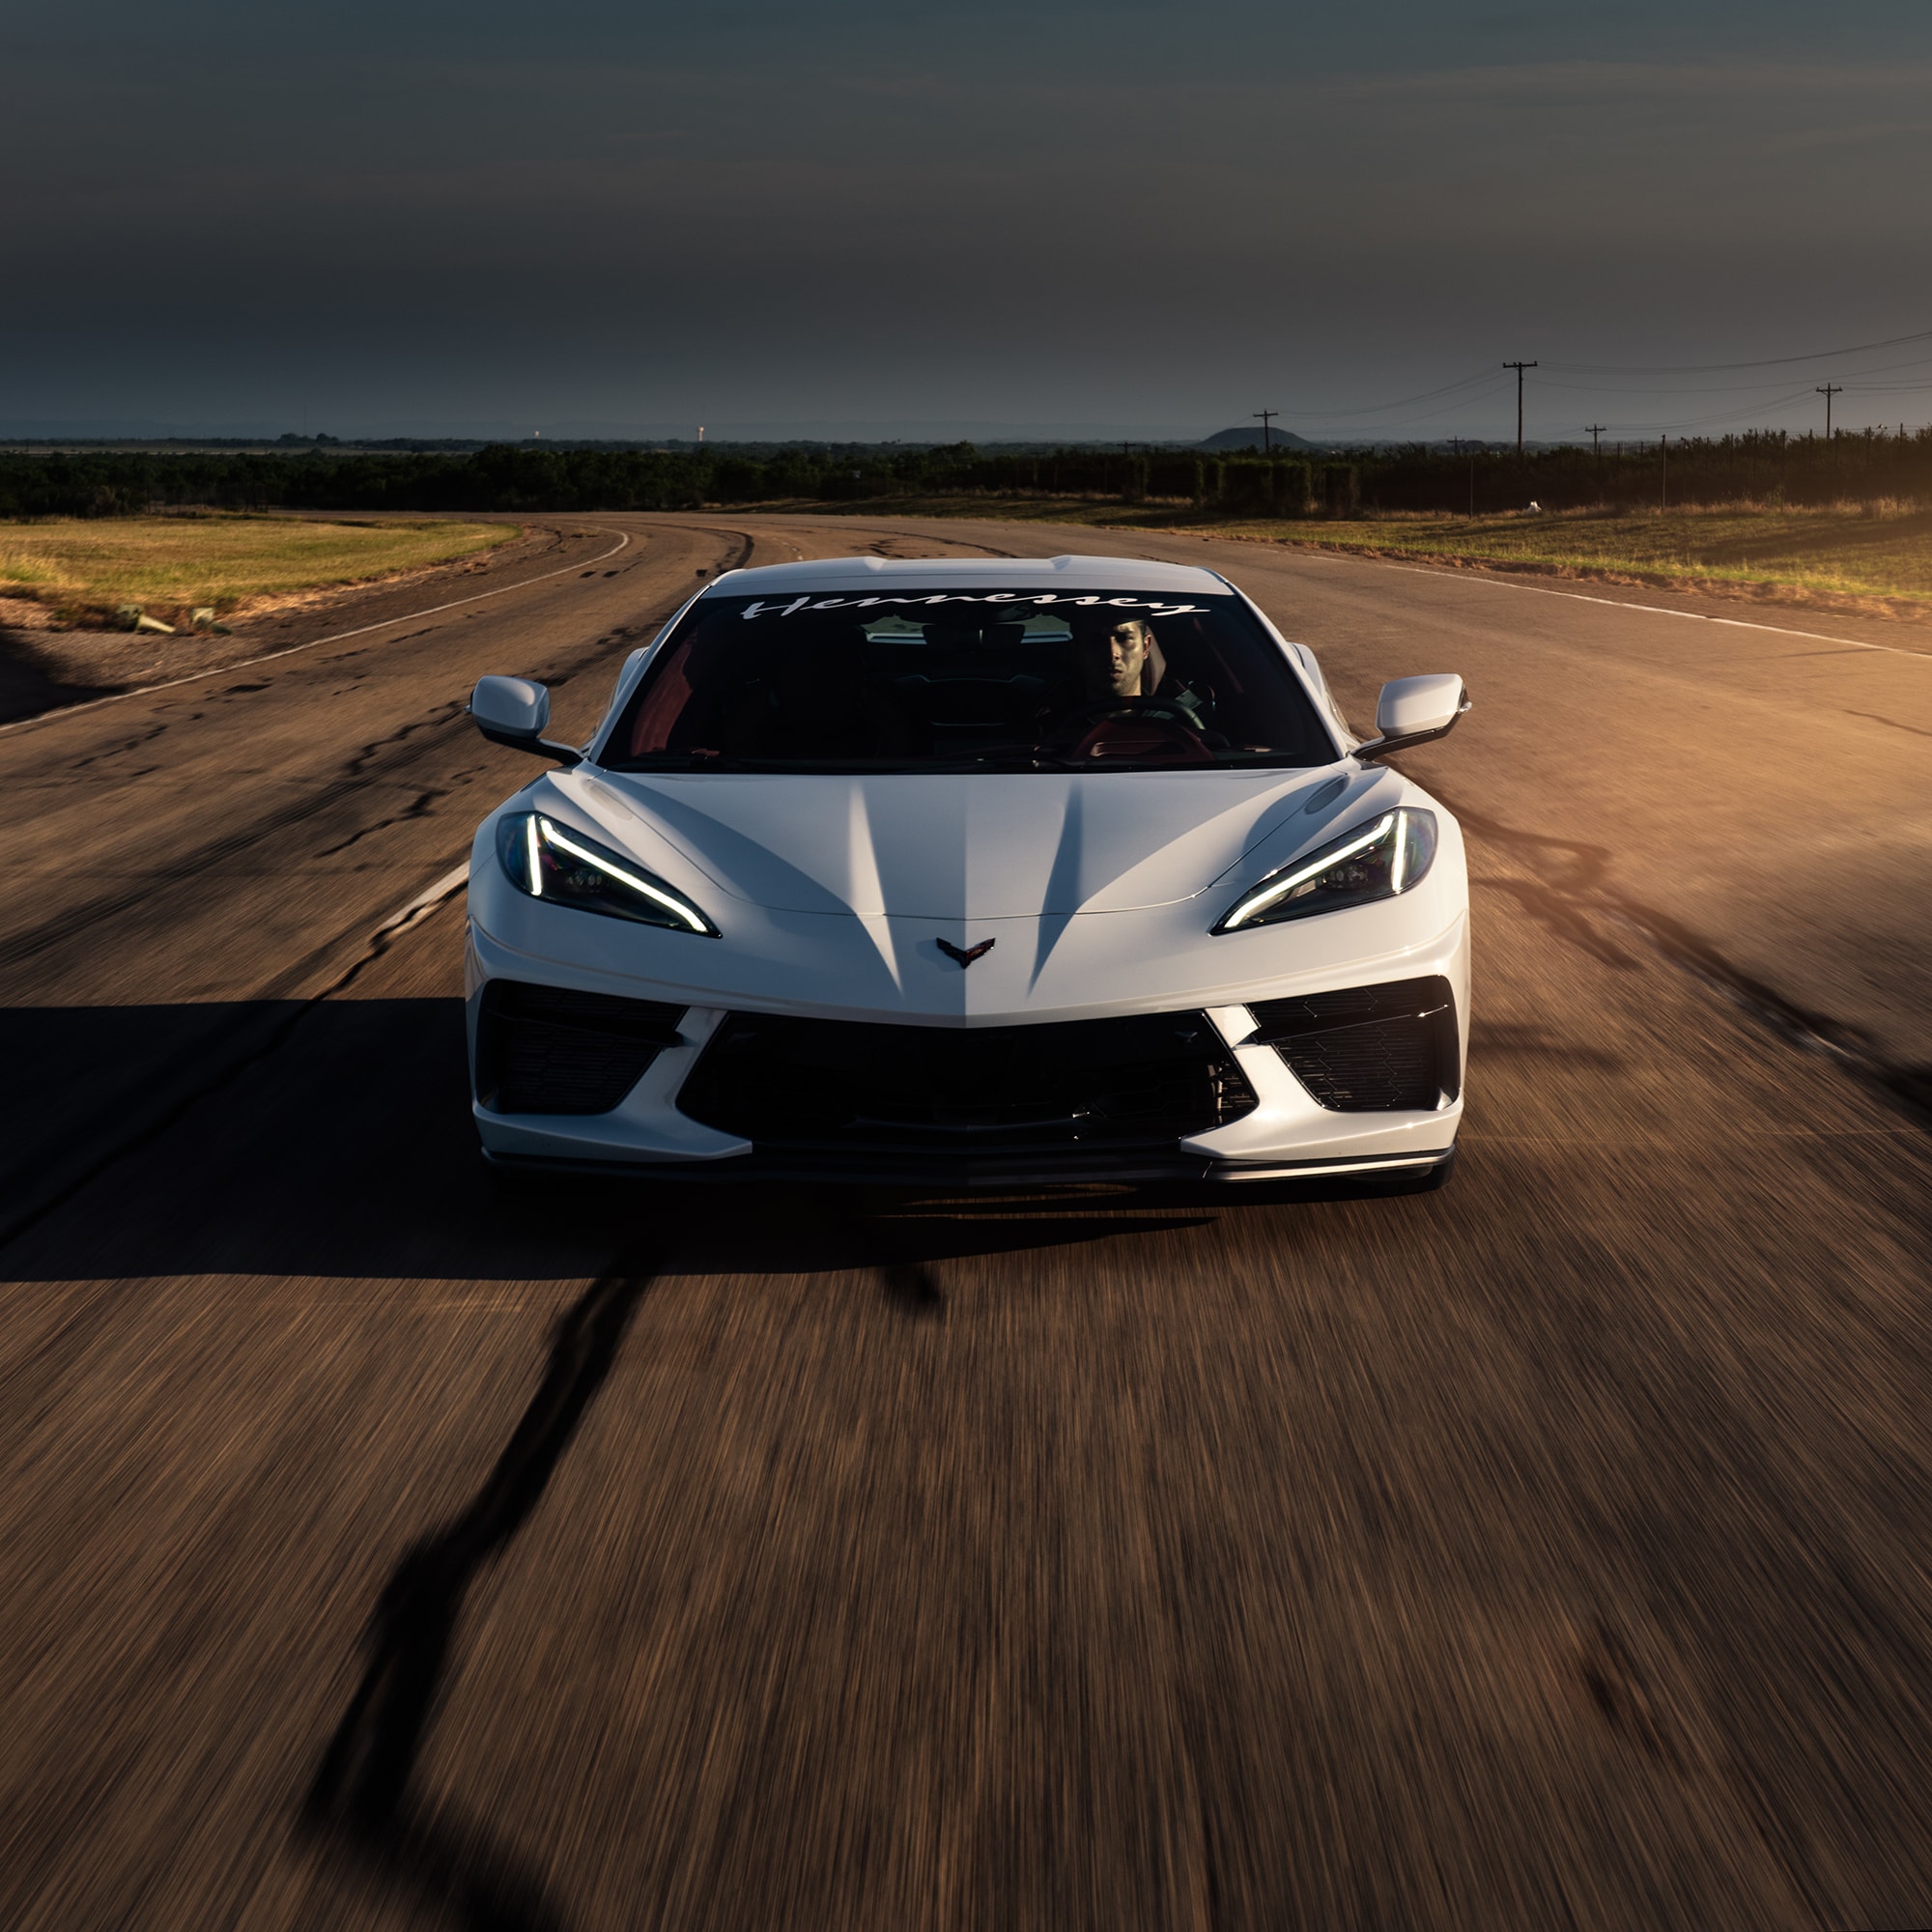 Hennessey-C8-205-MPH-Top-Speed-7-min